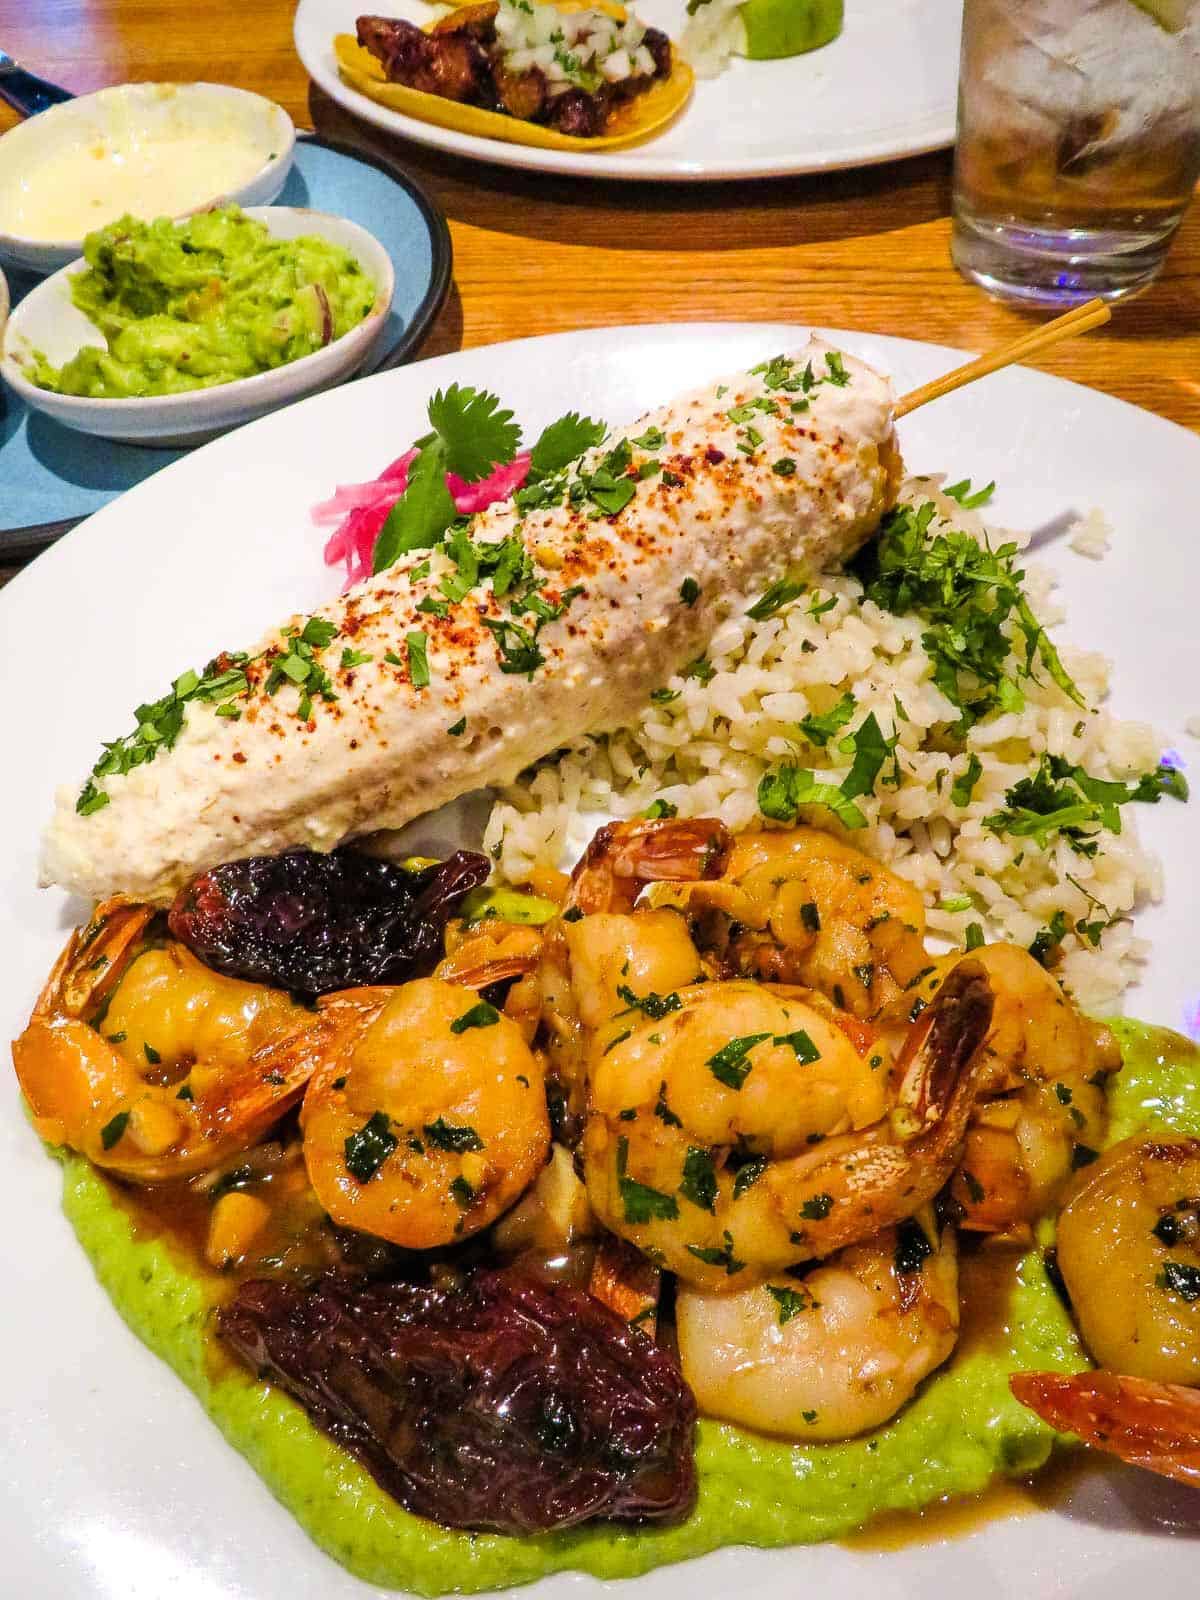 Grilled shrimp and street corn at Jalisco Taqueria & Tequila